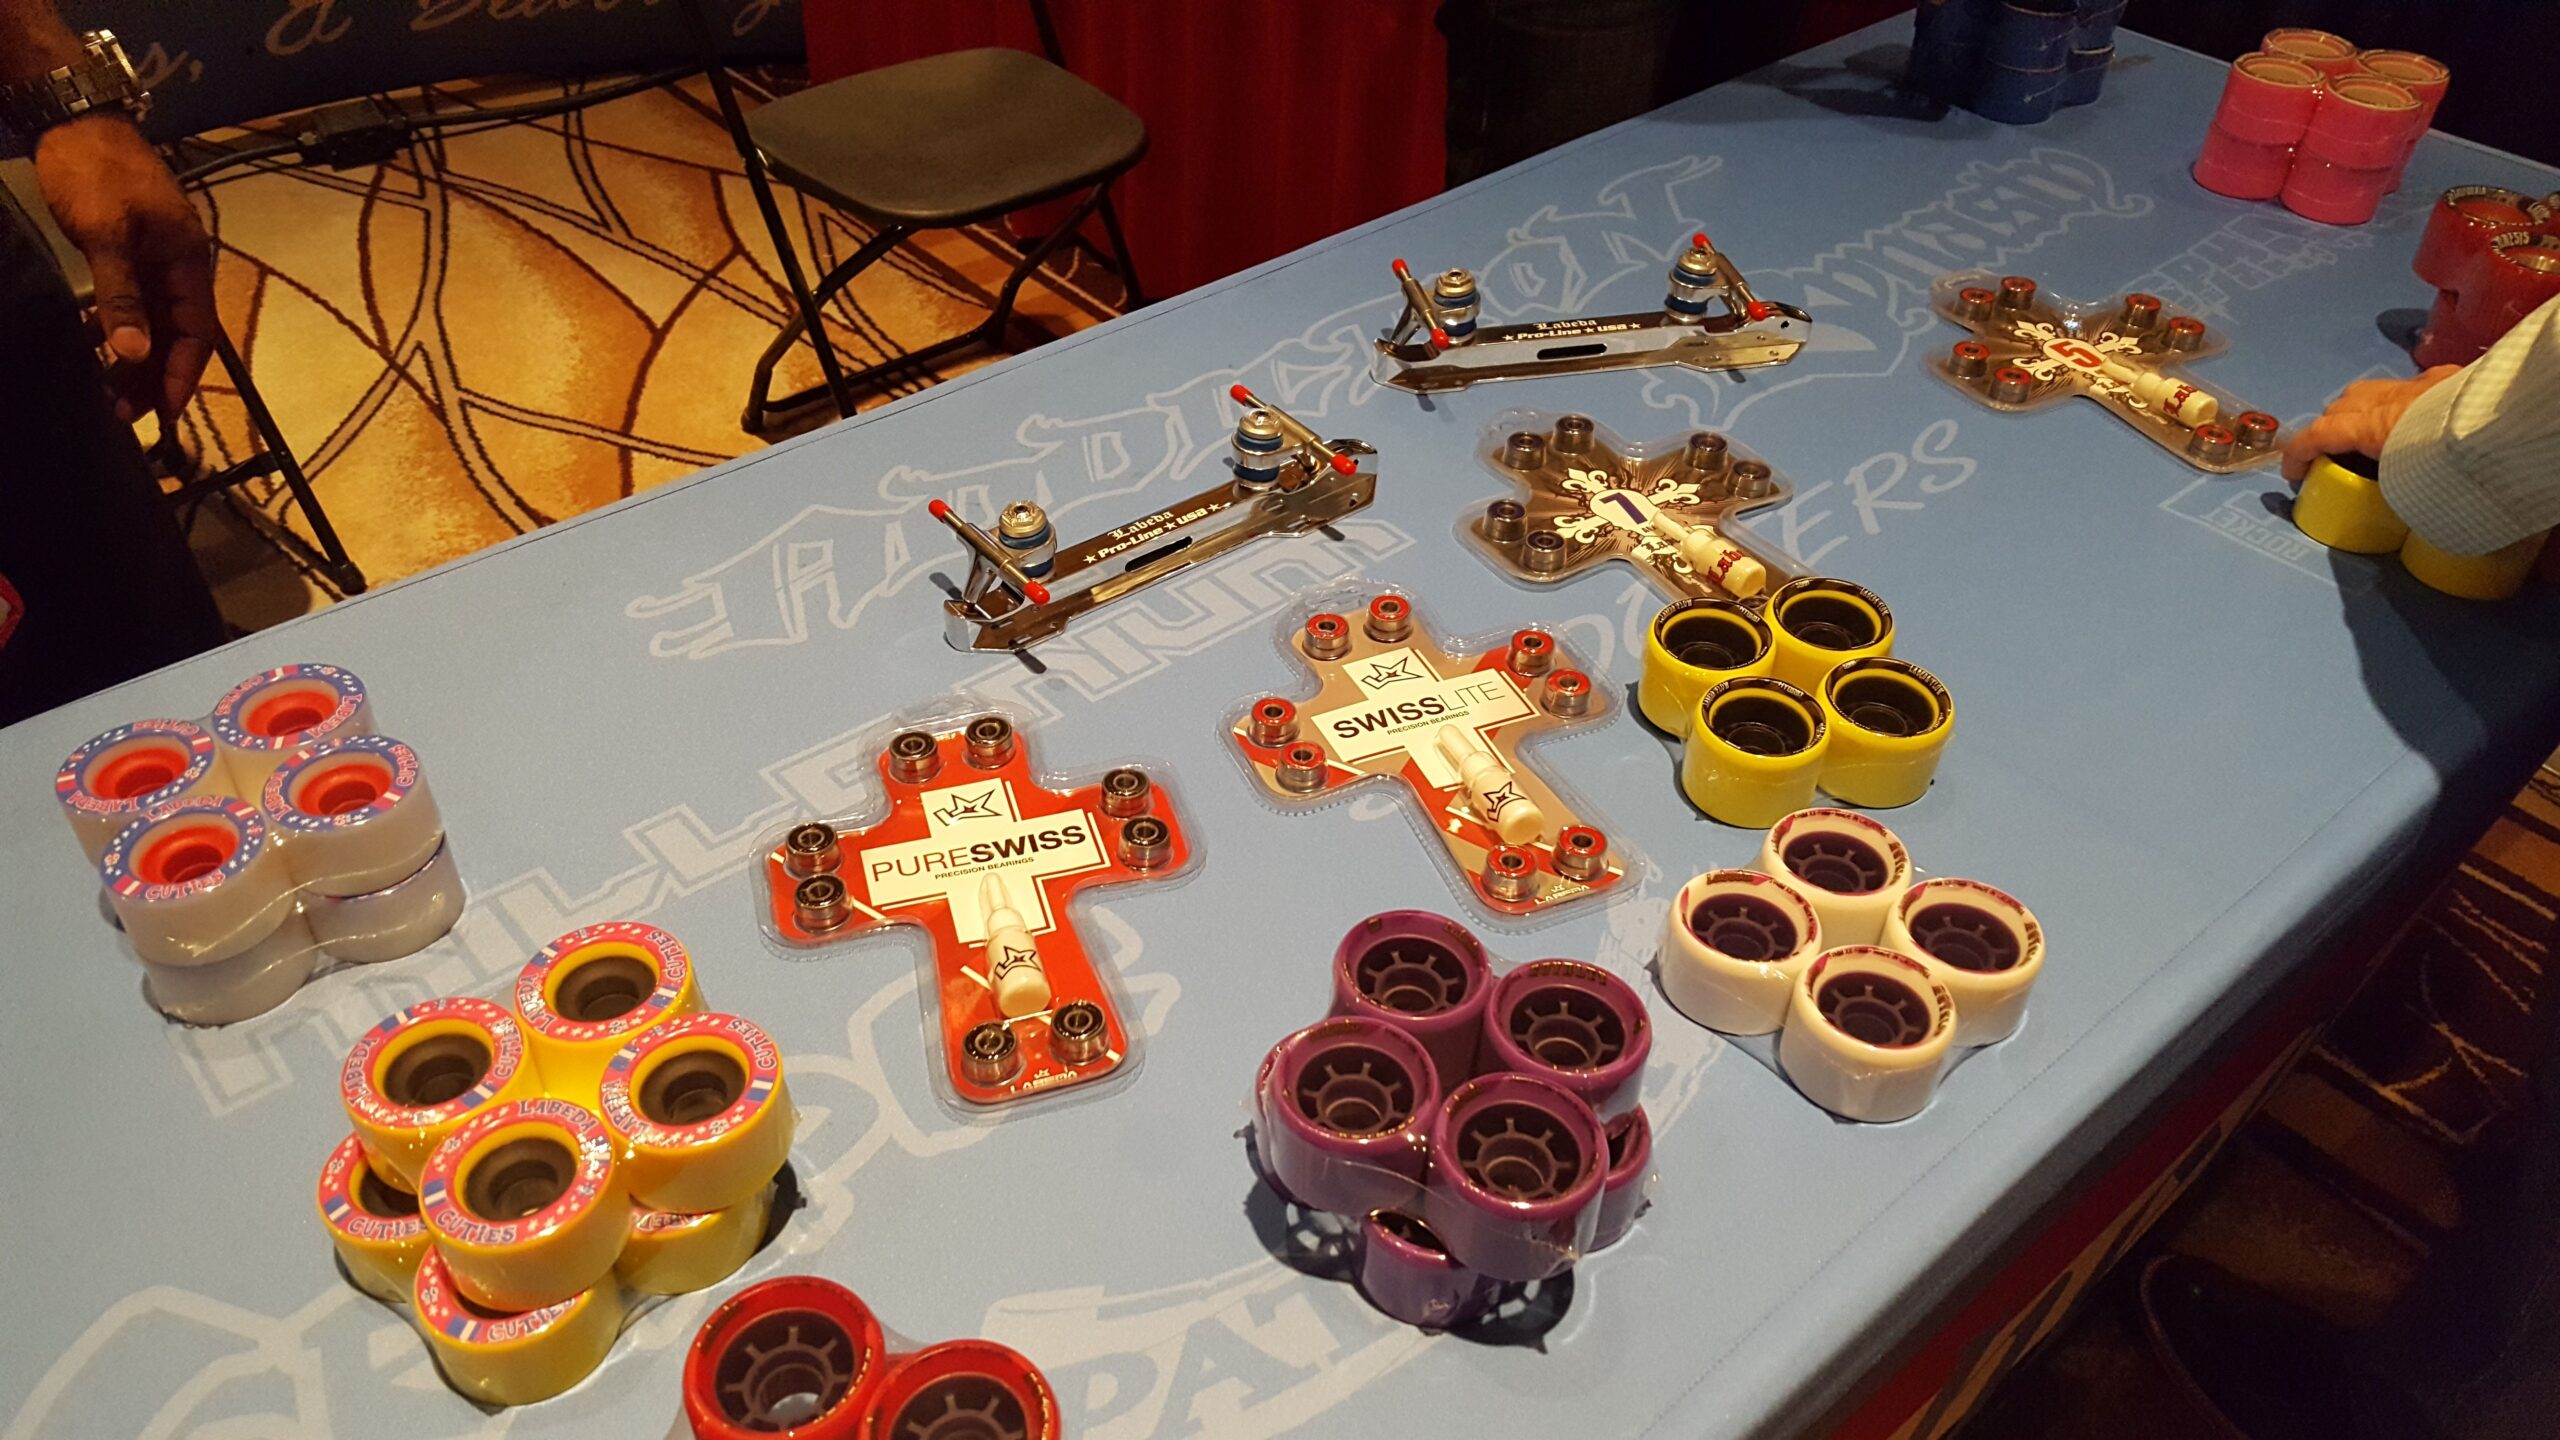 A table displaying packaged roller skate wheels, bearings, and quad roller skate plates.